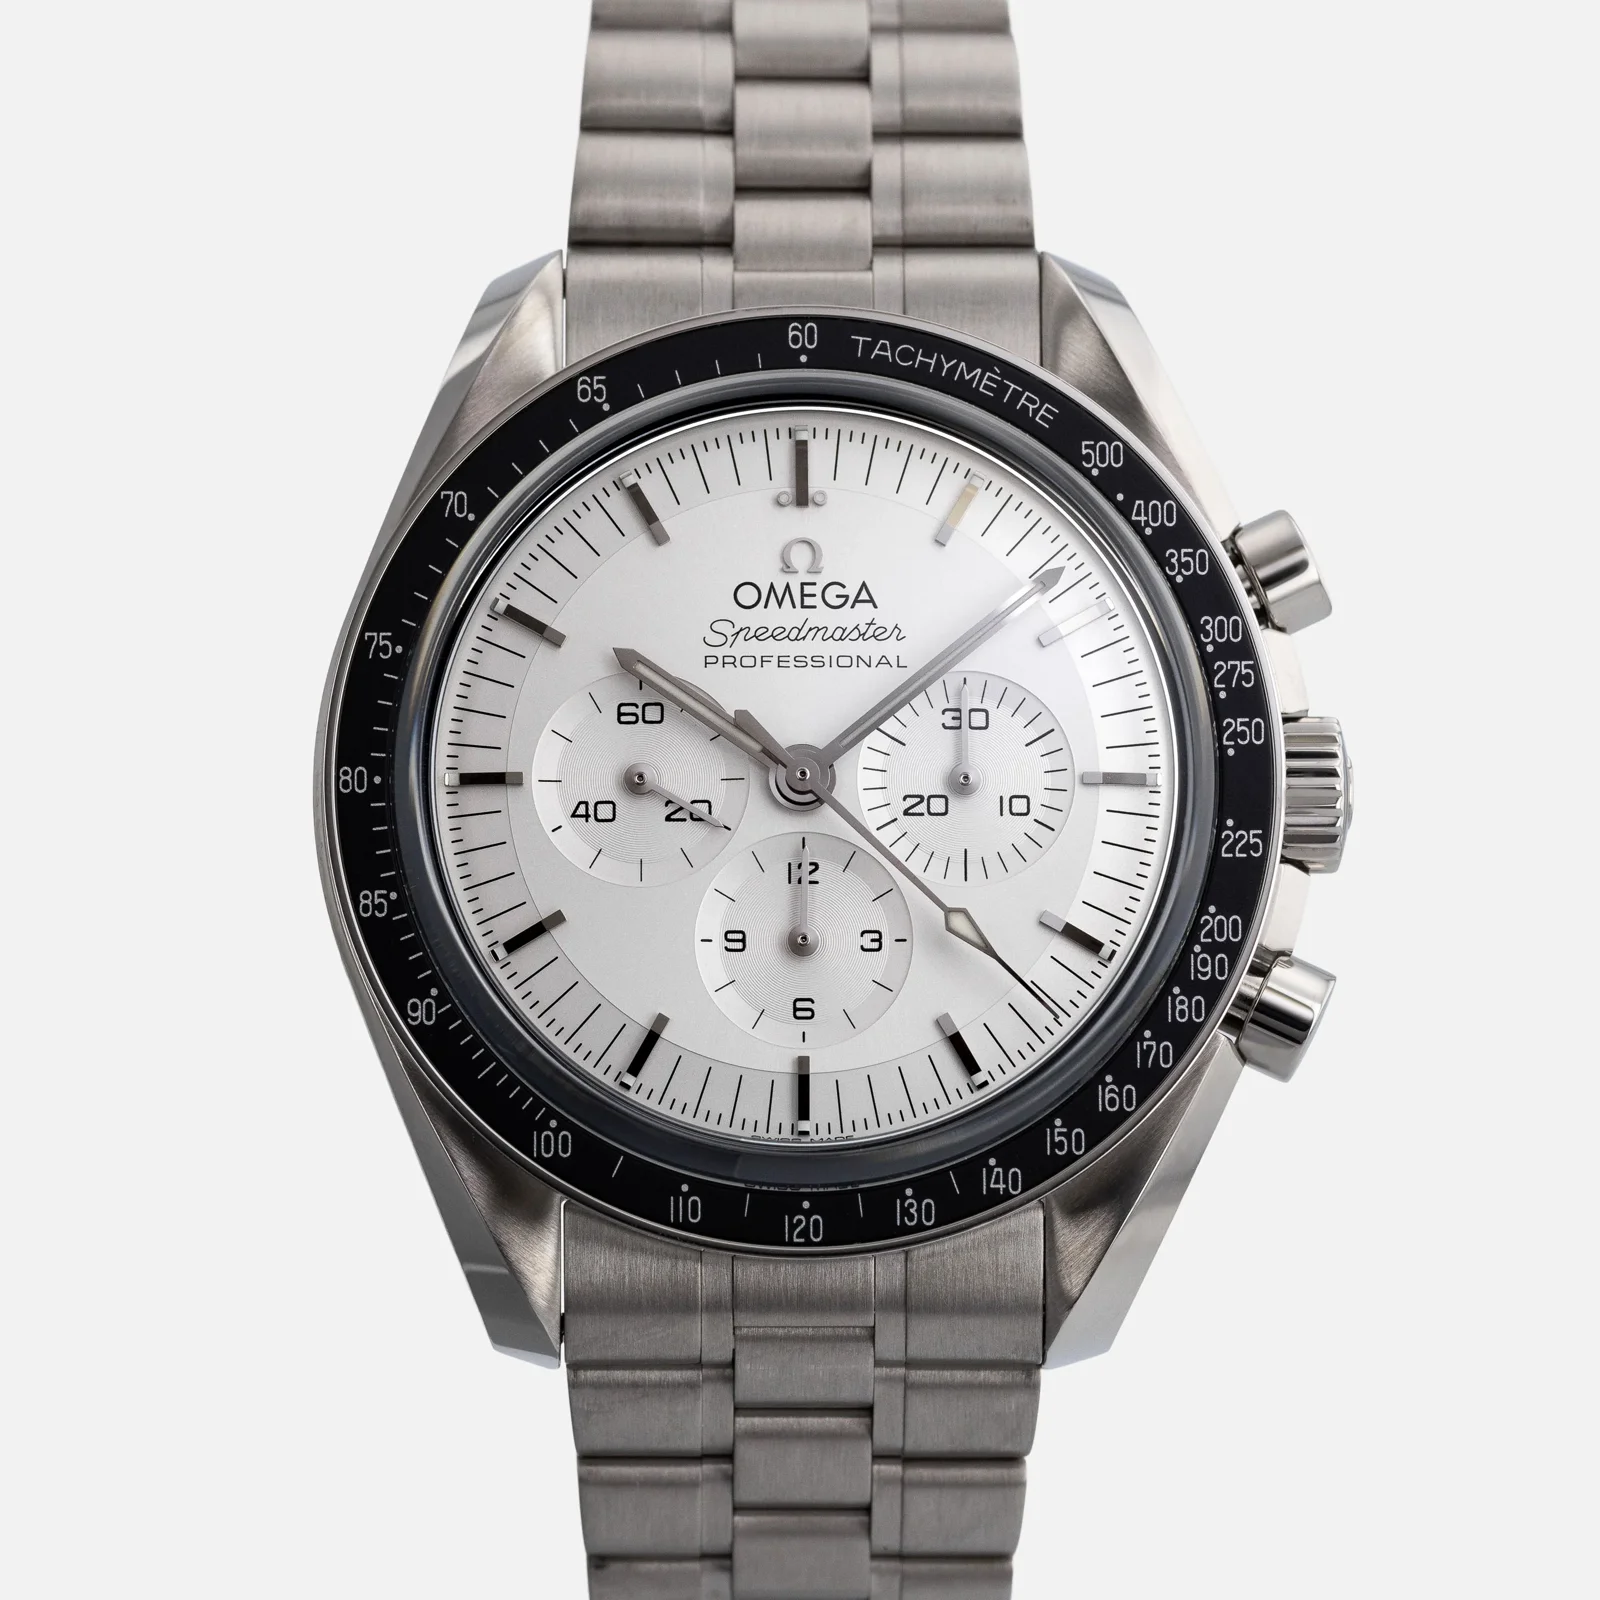 Image of OMEGA Speedmaster Professional Moonwatch Co-Axial Master Chronometer Chronograph Canopus Gold 310.60.42.50.02.001